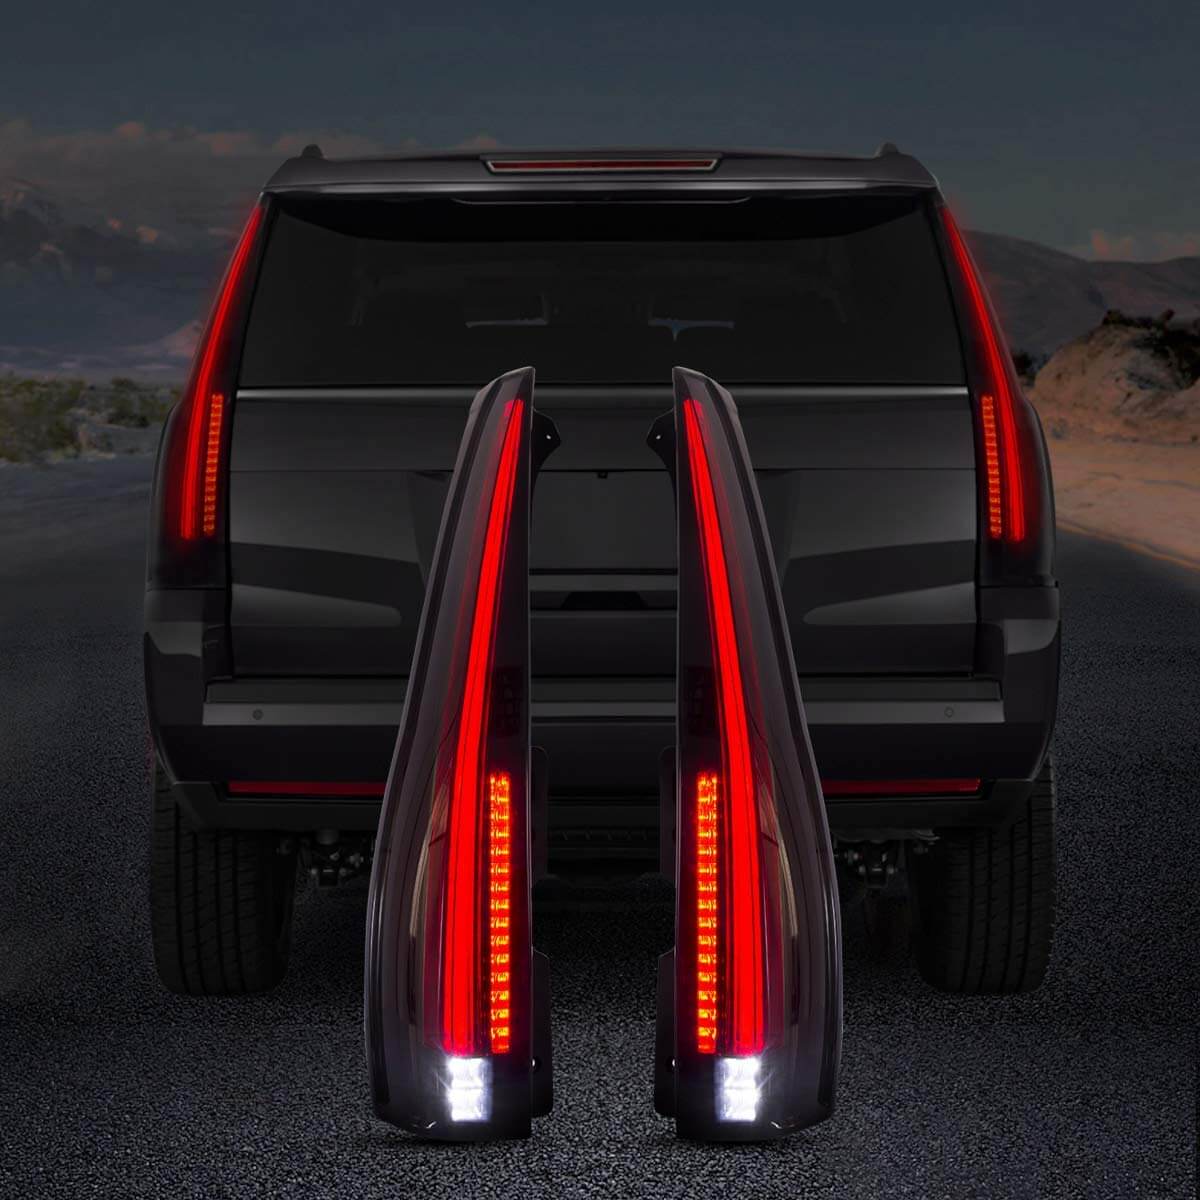 07-14 Cadillac Escalade 3th Gen (GMT900) Vland LED Tail Lights with Sequential Turn Signal